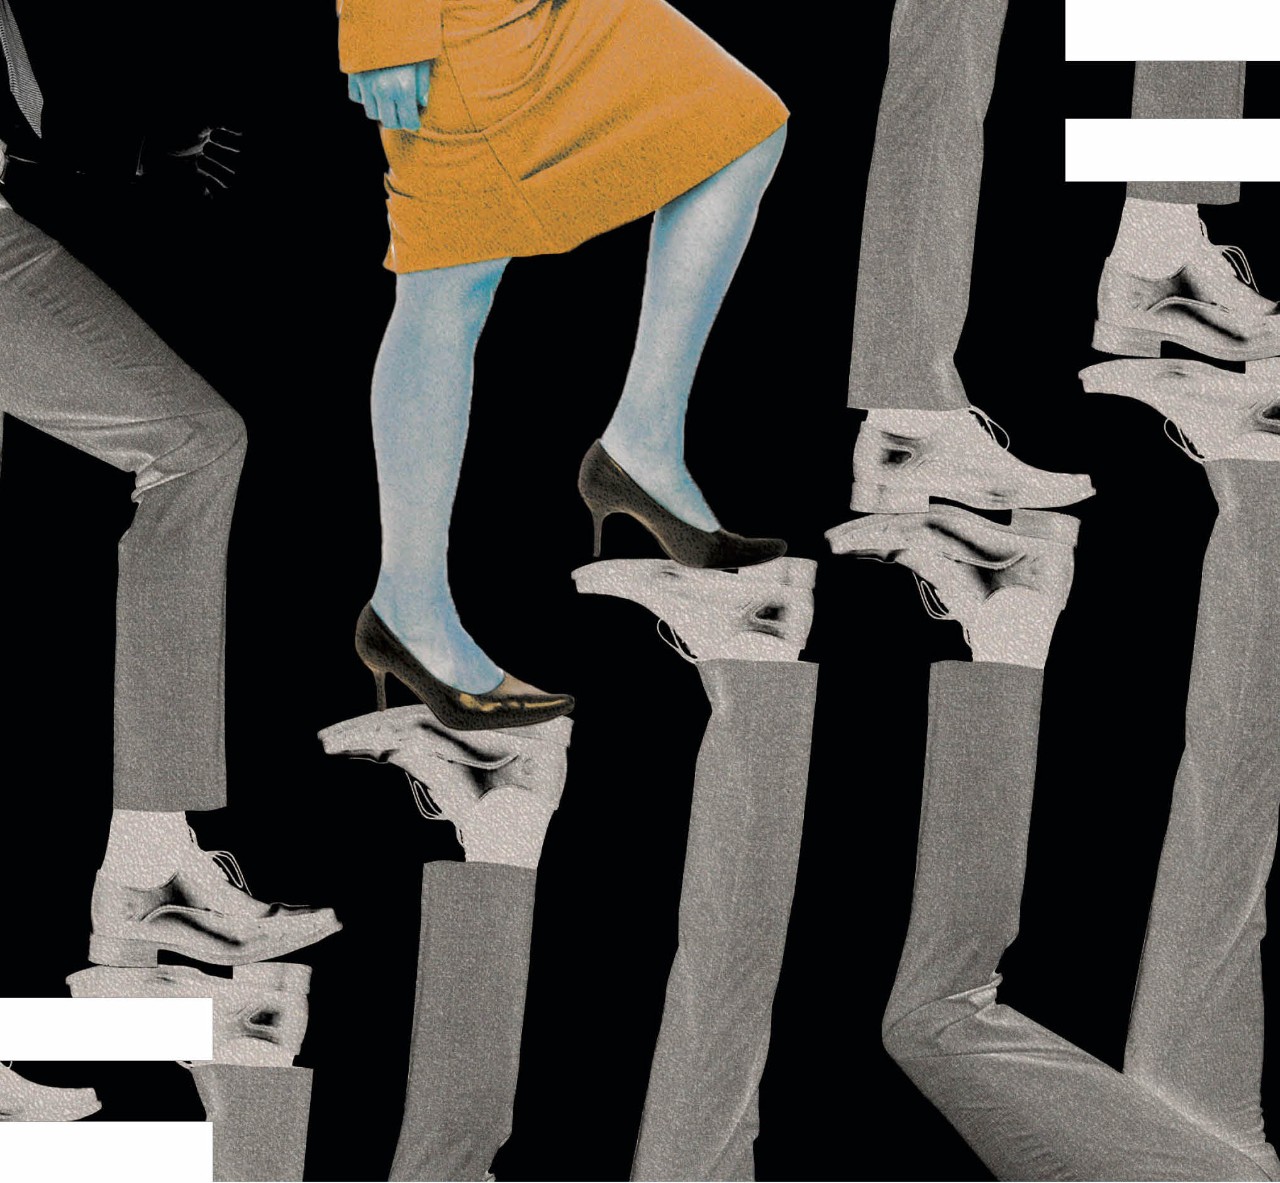 Artistic representation of a woman climbing the professional ladder. The illustration portrays a woman’s feet climbing up stairs amid many male feet.